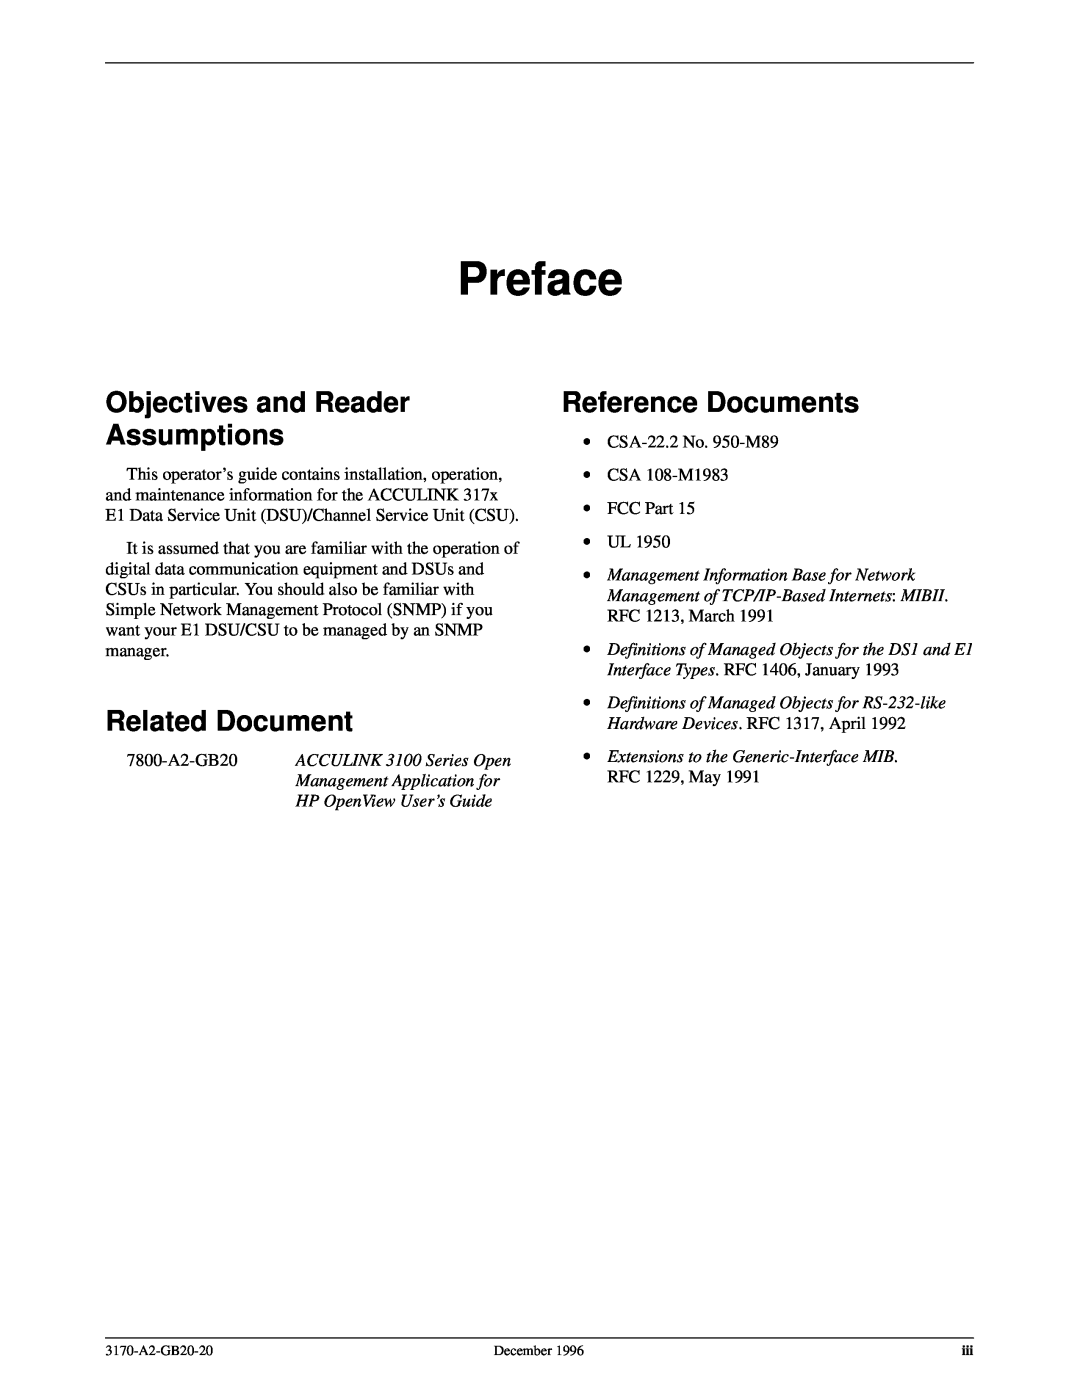 Paradyne 317x E1 manual Preface, Objectives and Reader Assumptions, Related Document, Reference Documents 